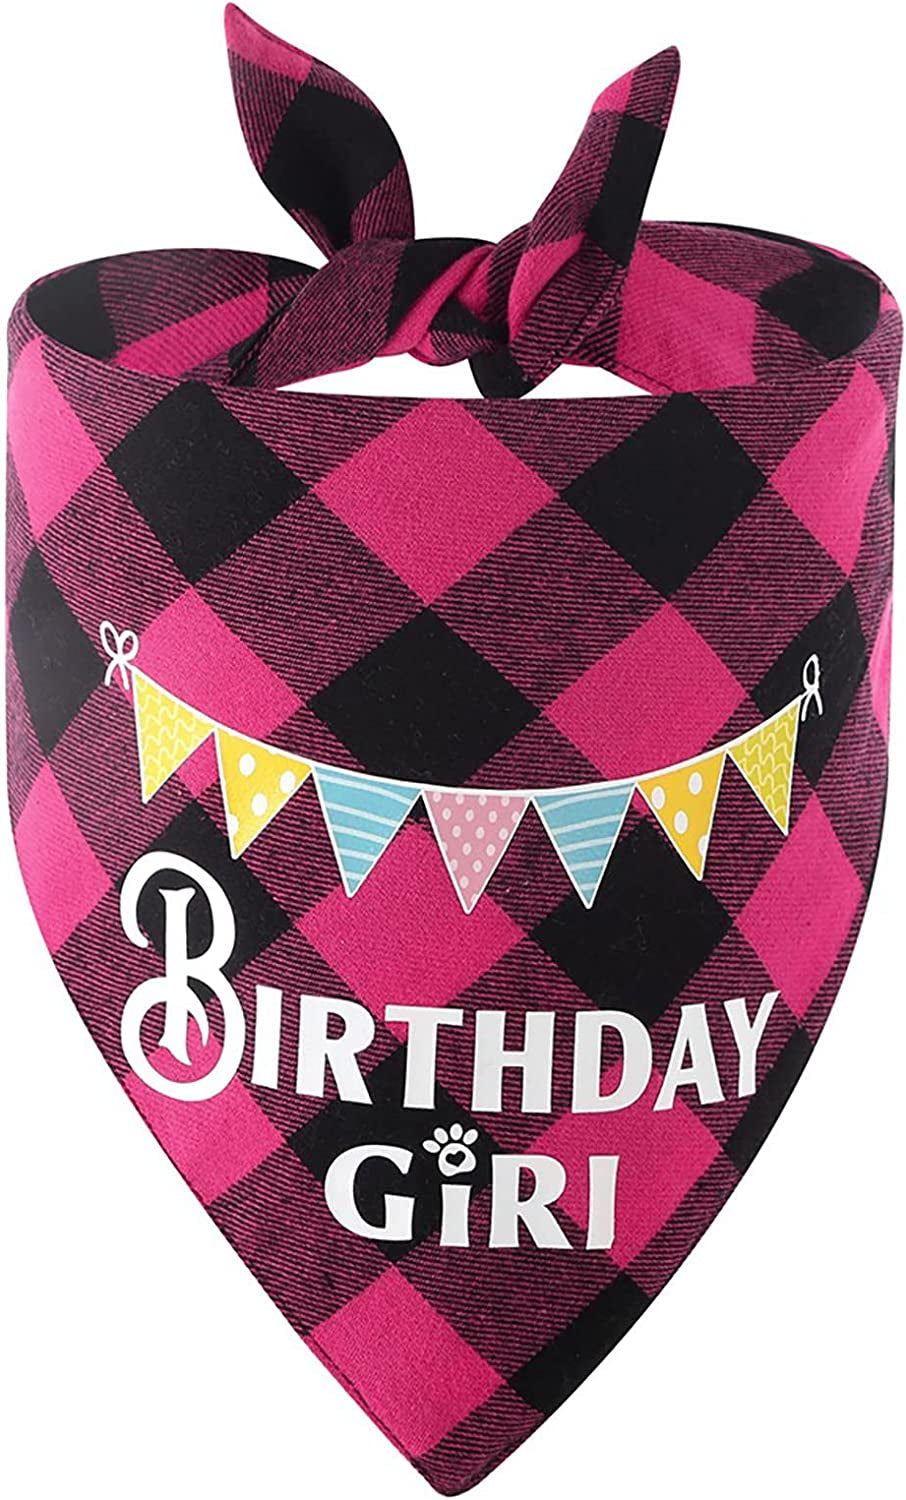 Dog Birthday Boy Bandana Pet Happy Birthday Party Pet Plaid Birthday Towel Pet Triangle Towel Dog Birthday Triangle Towel Pet Dog Scarf Bandana for Dogs Cats Costume (C, One Size) Animals & Pet Supplies > Pet Supplies > Dog Supplies > Dog Apparel Generic H One Size 